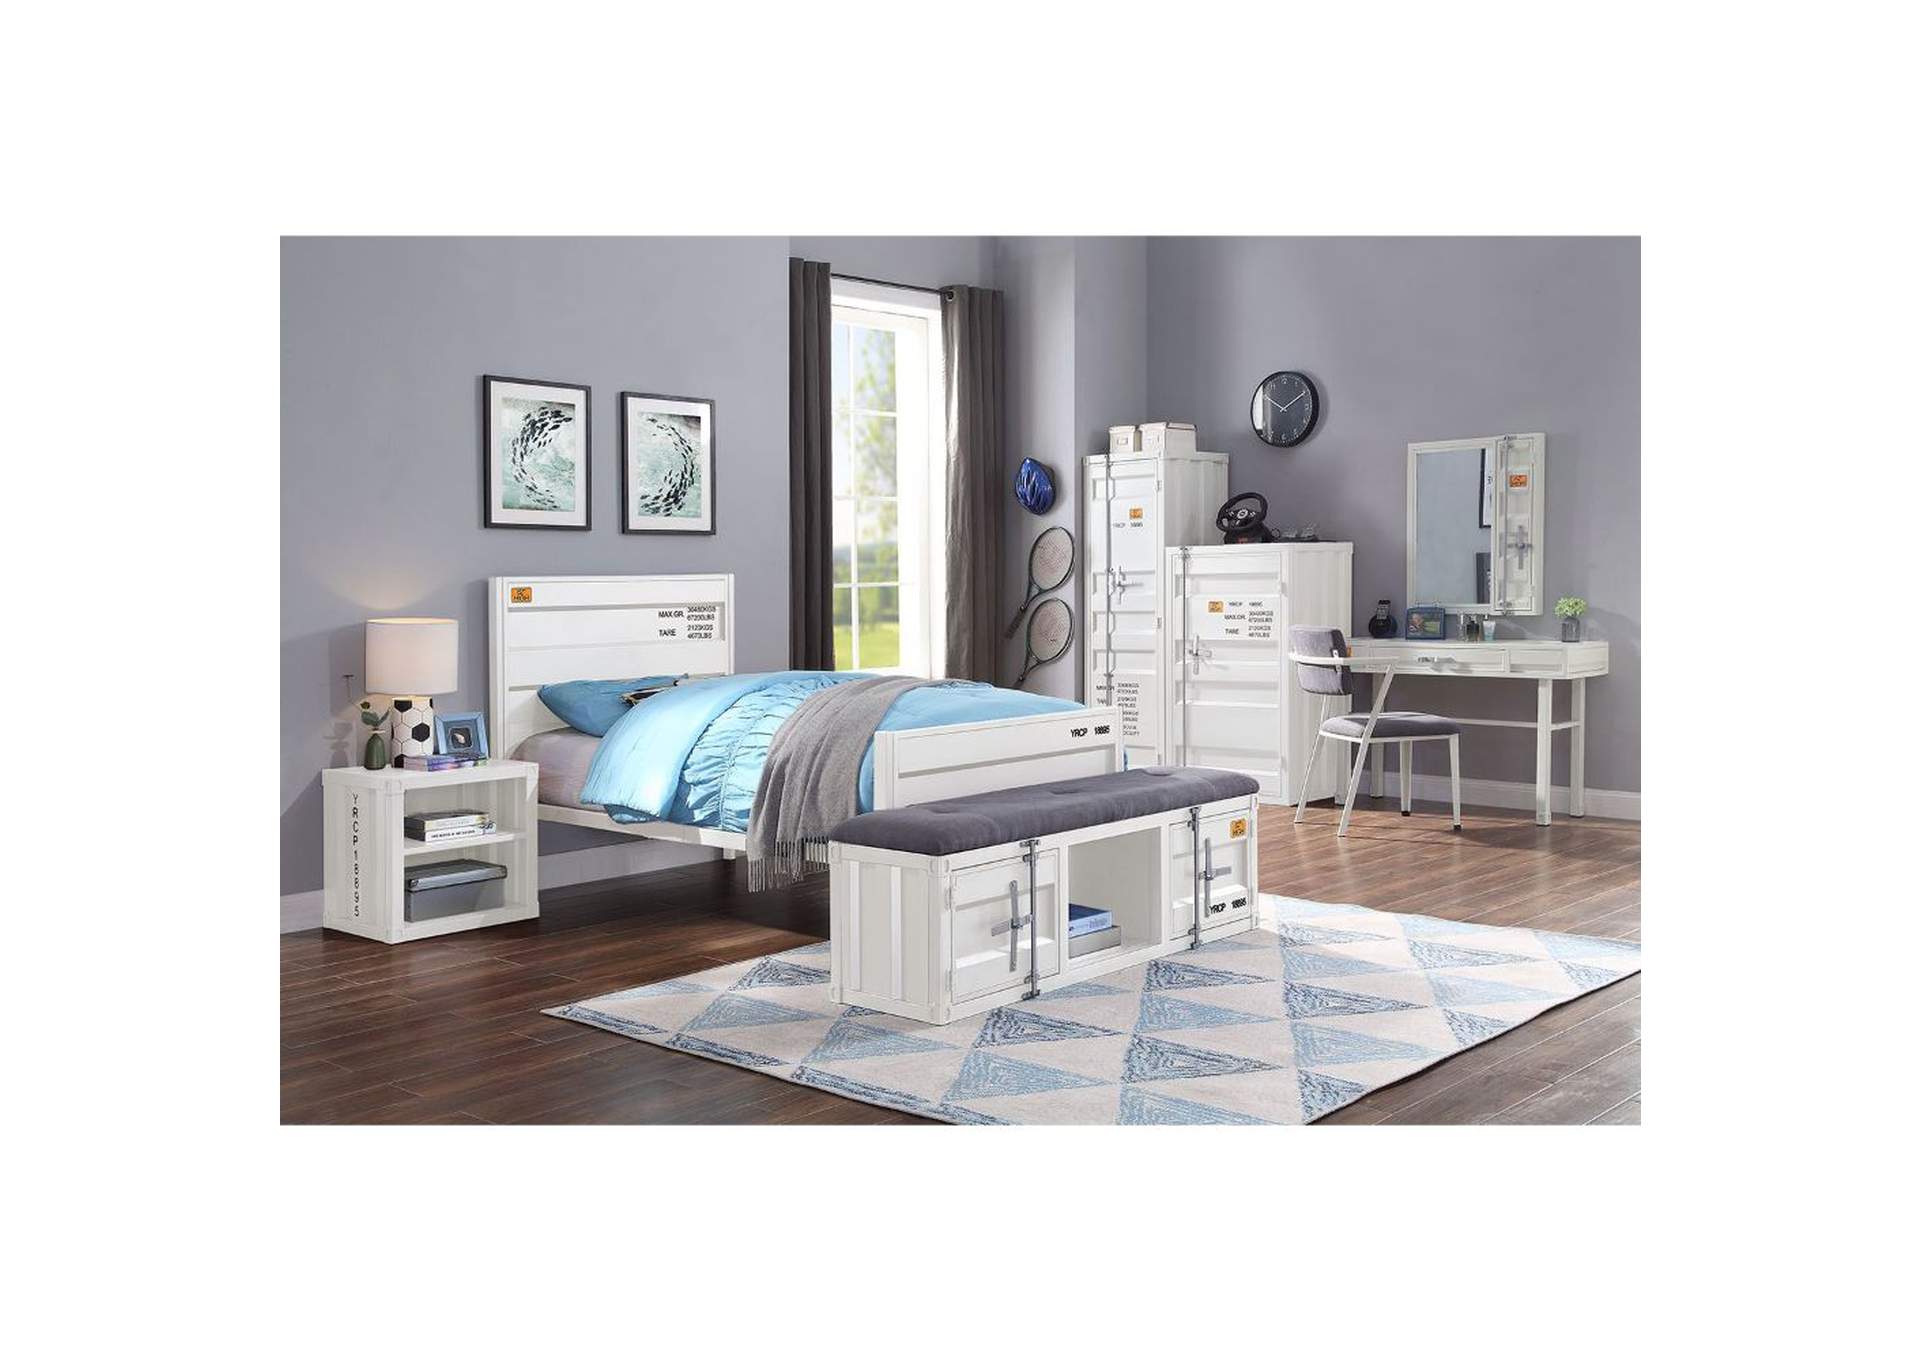 White Cargo Twin Bed Best Furniture, Cargo Twin Bed